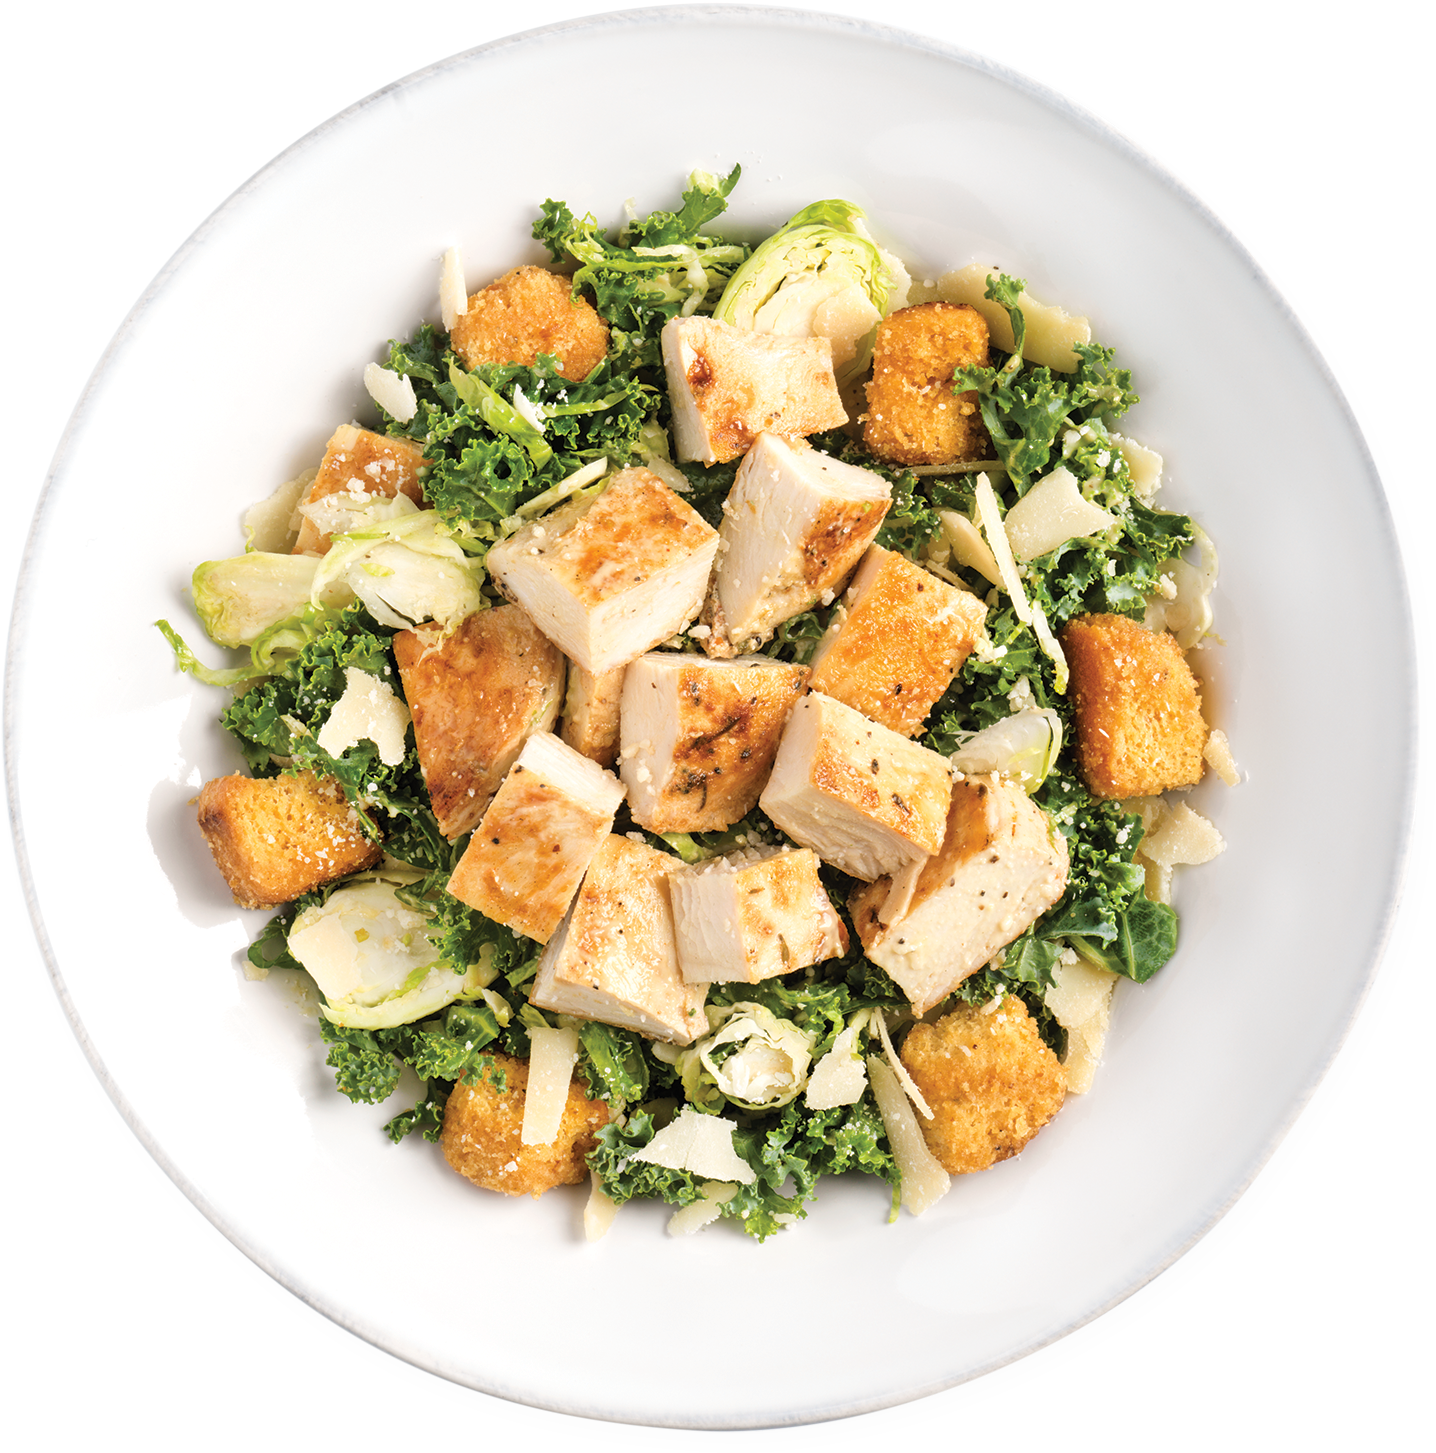 A Plate Of Salad With Chicken And Lettuce